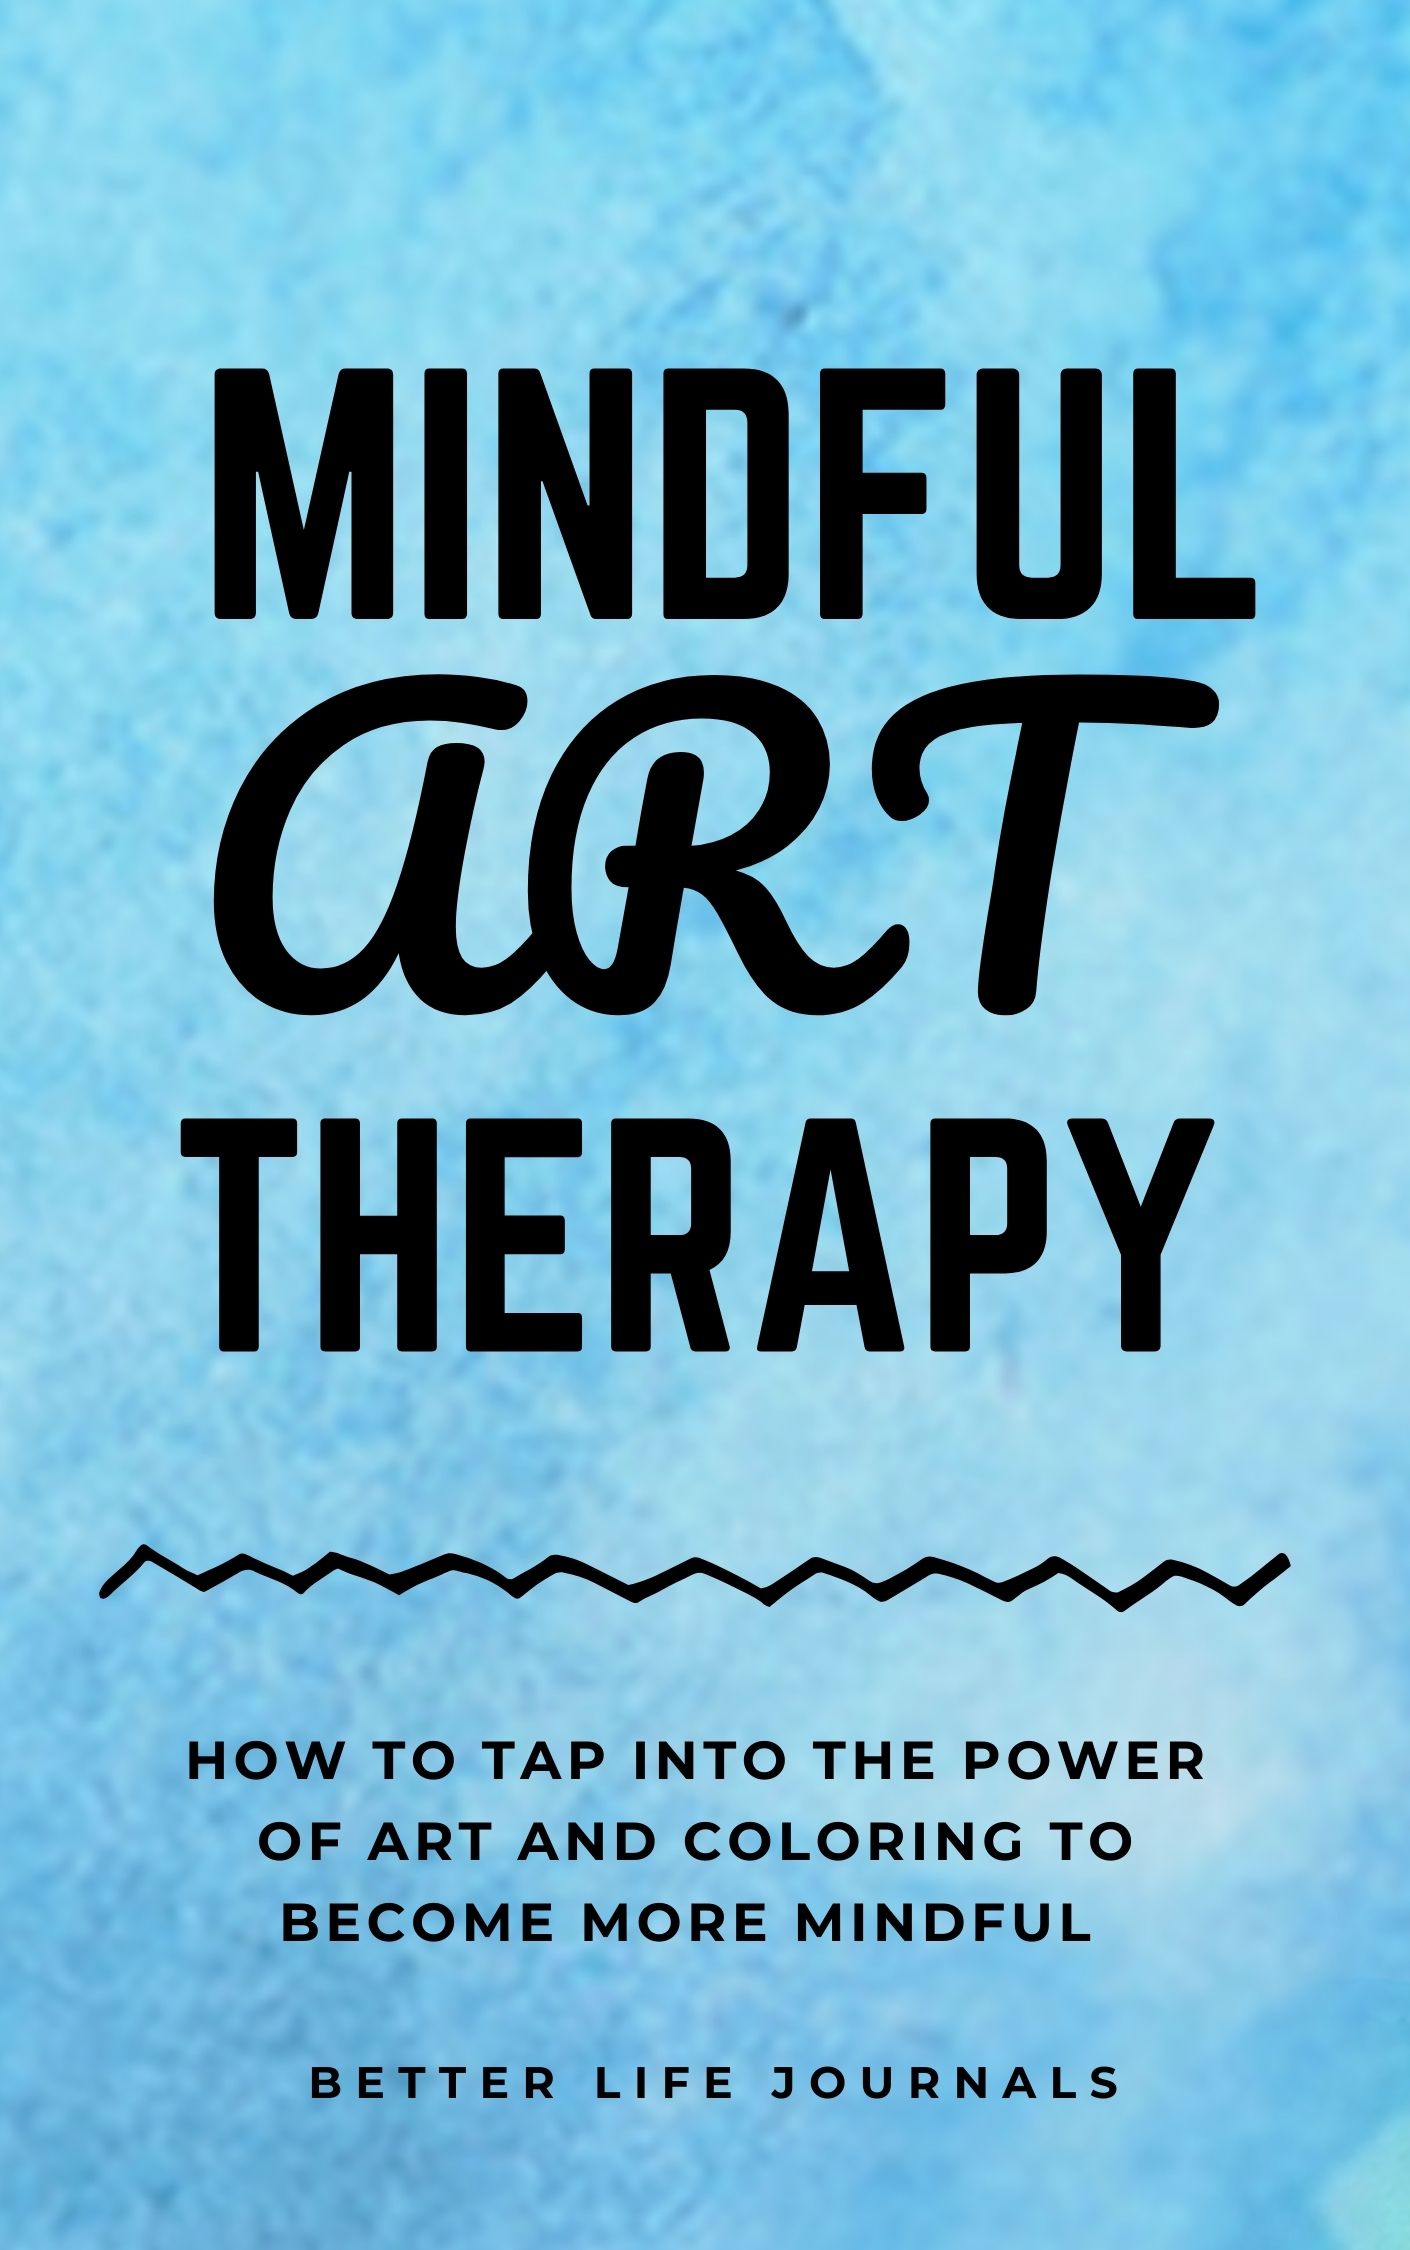 FREE: Mindful Art Therapy 101: How to Tap Into the Power of Art And Coloring to Become More Mindful by Better Life Journals